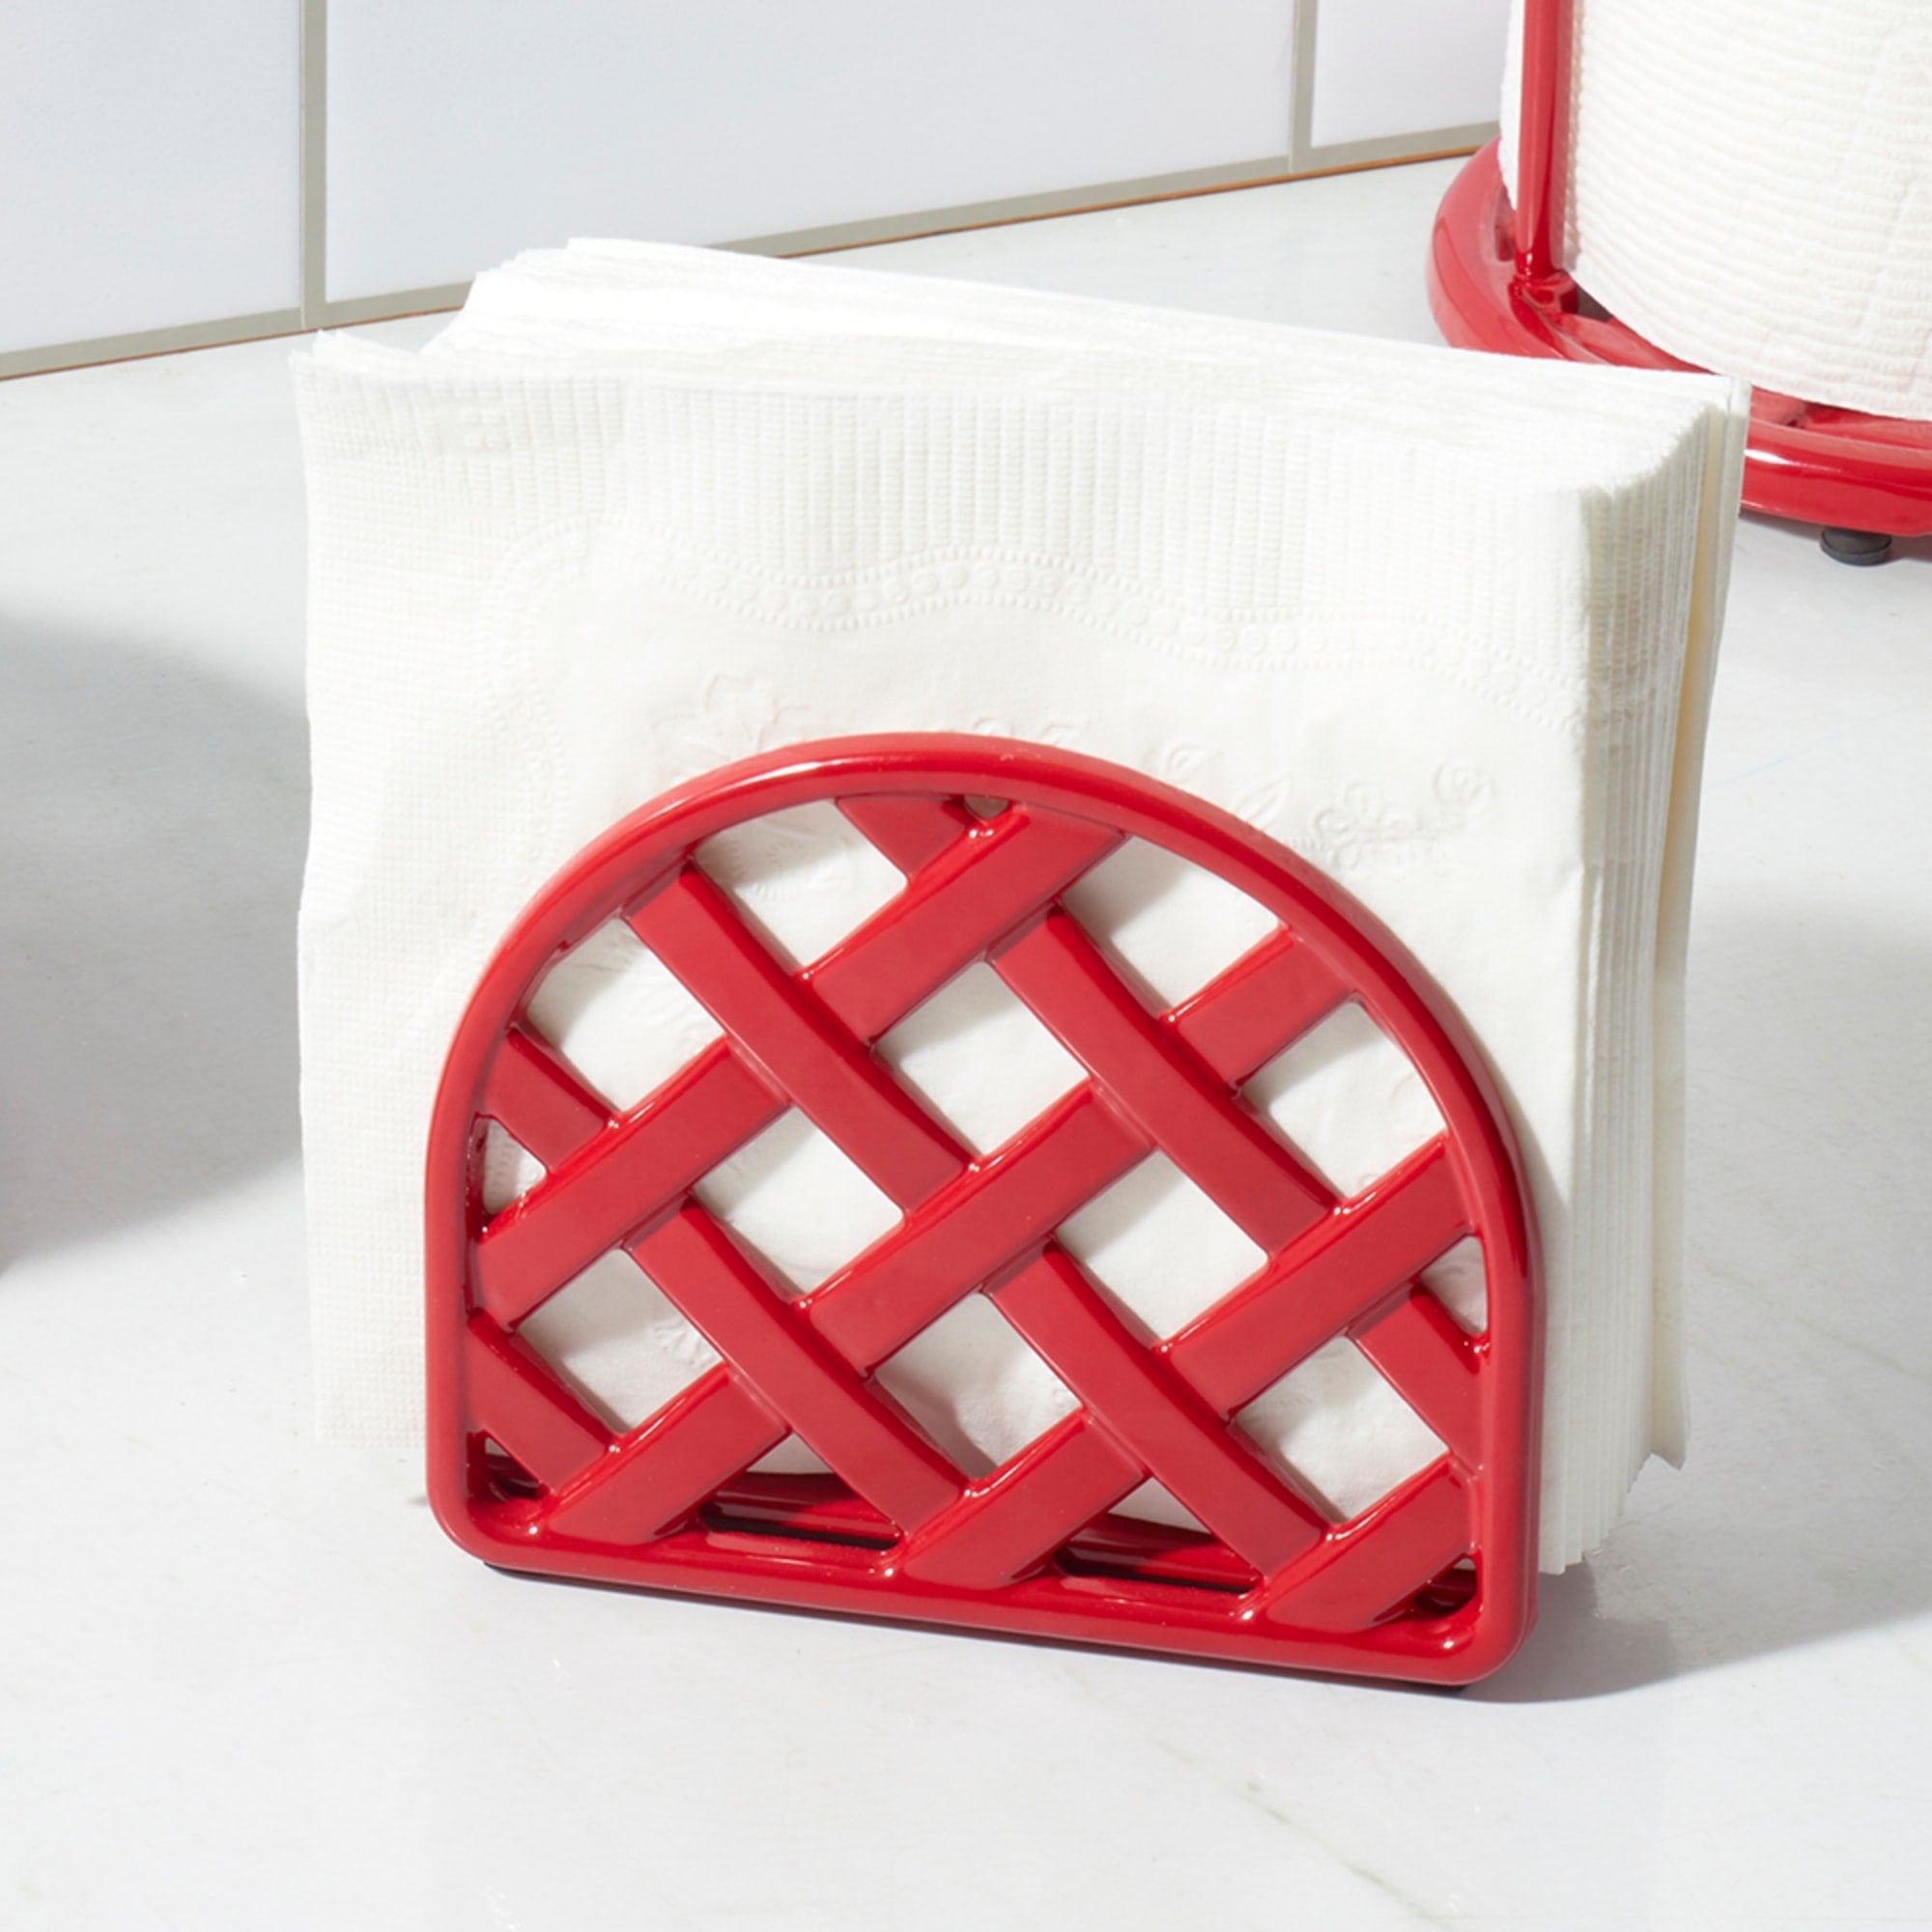 Home Basics Weave Upright Cast Iron Napkin Holder, Red $8.00 EACH, CASE PACK OF 6